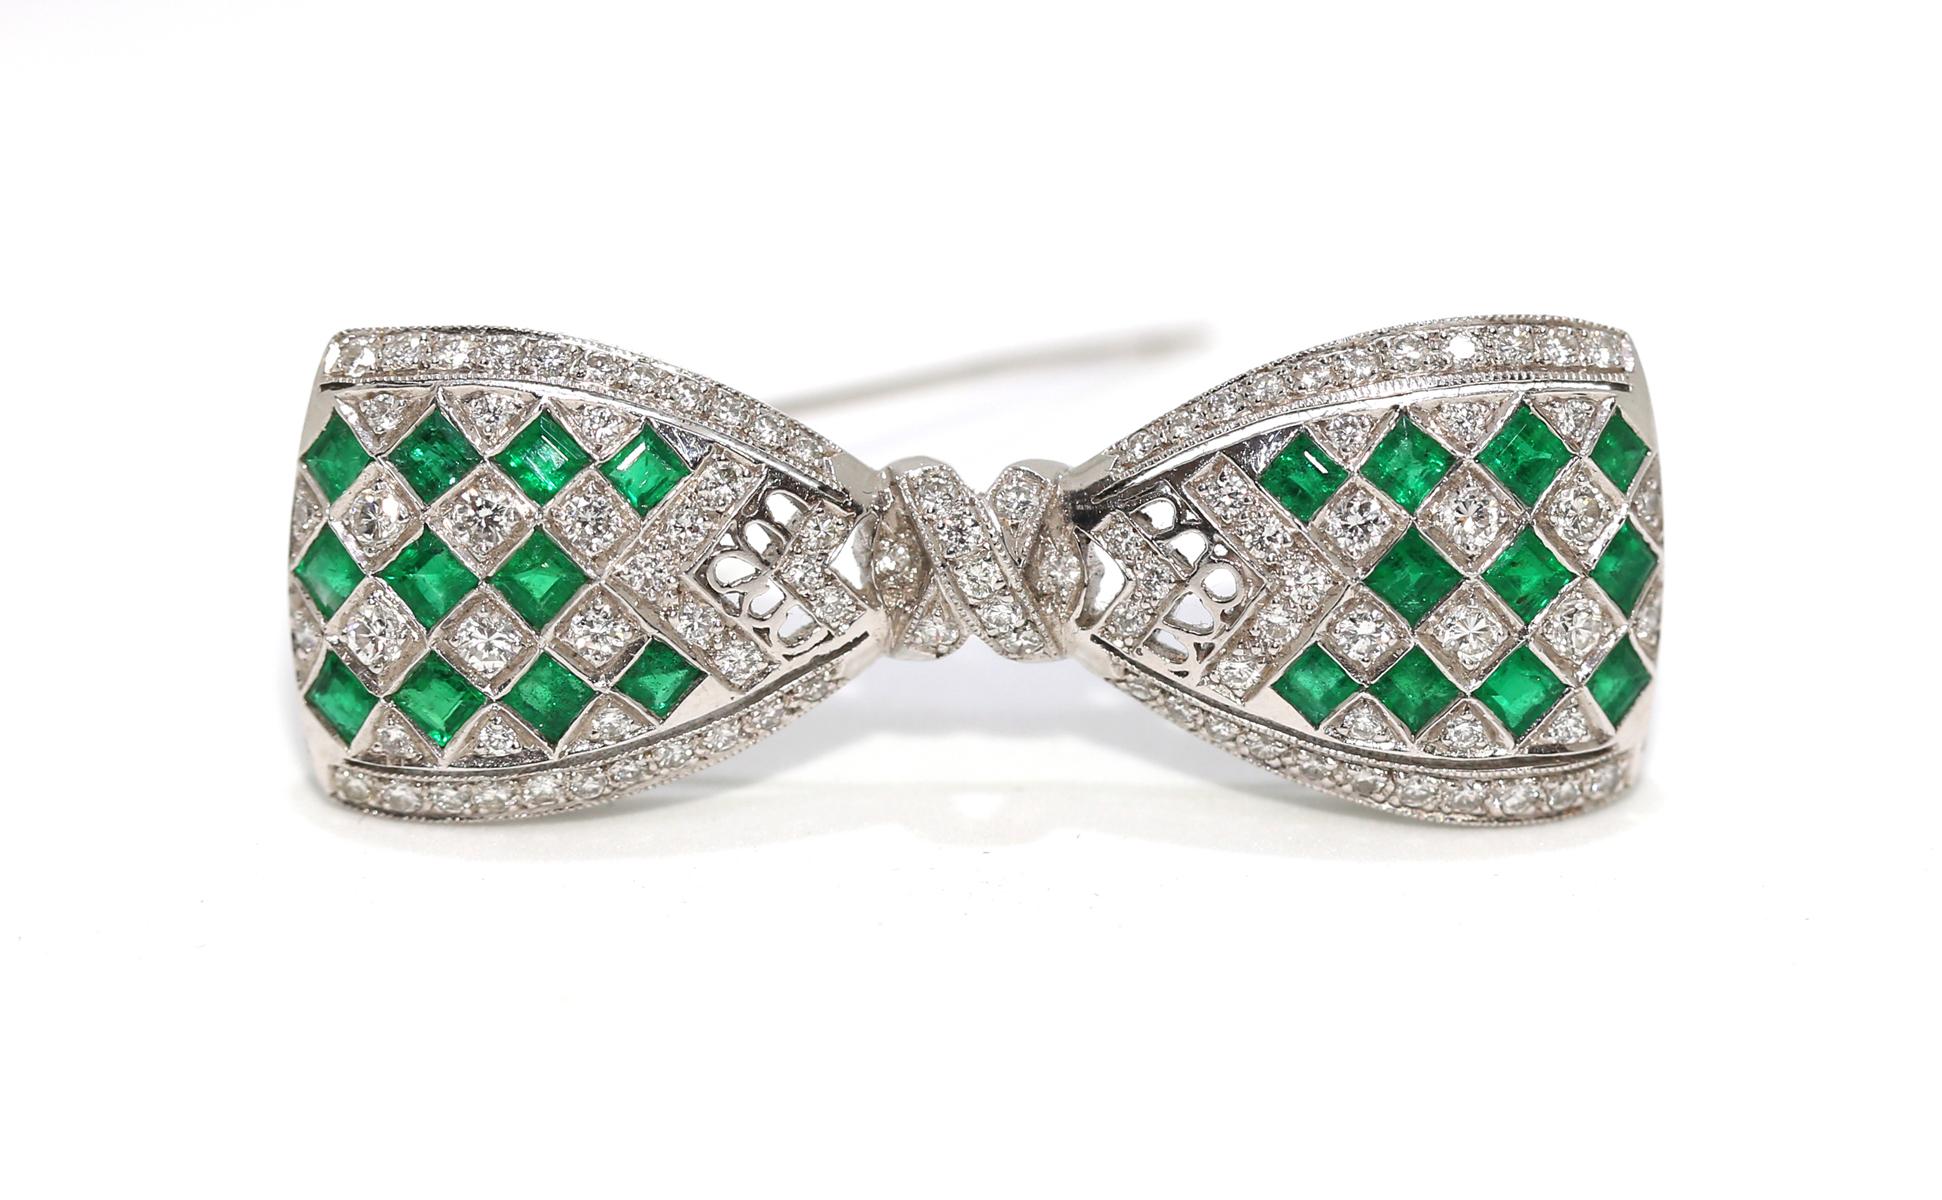 Art Deco perfect design example with square Emeralds and Diamonds forming a fine Platinum Bow brooch. It will sit perfectly on any outfit for any occasion.  1.75 Ct of Emeralds and 1.30 Carats of Diamonds.
Once it was common to communicate a message